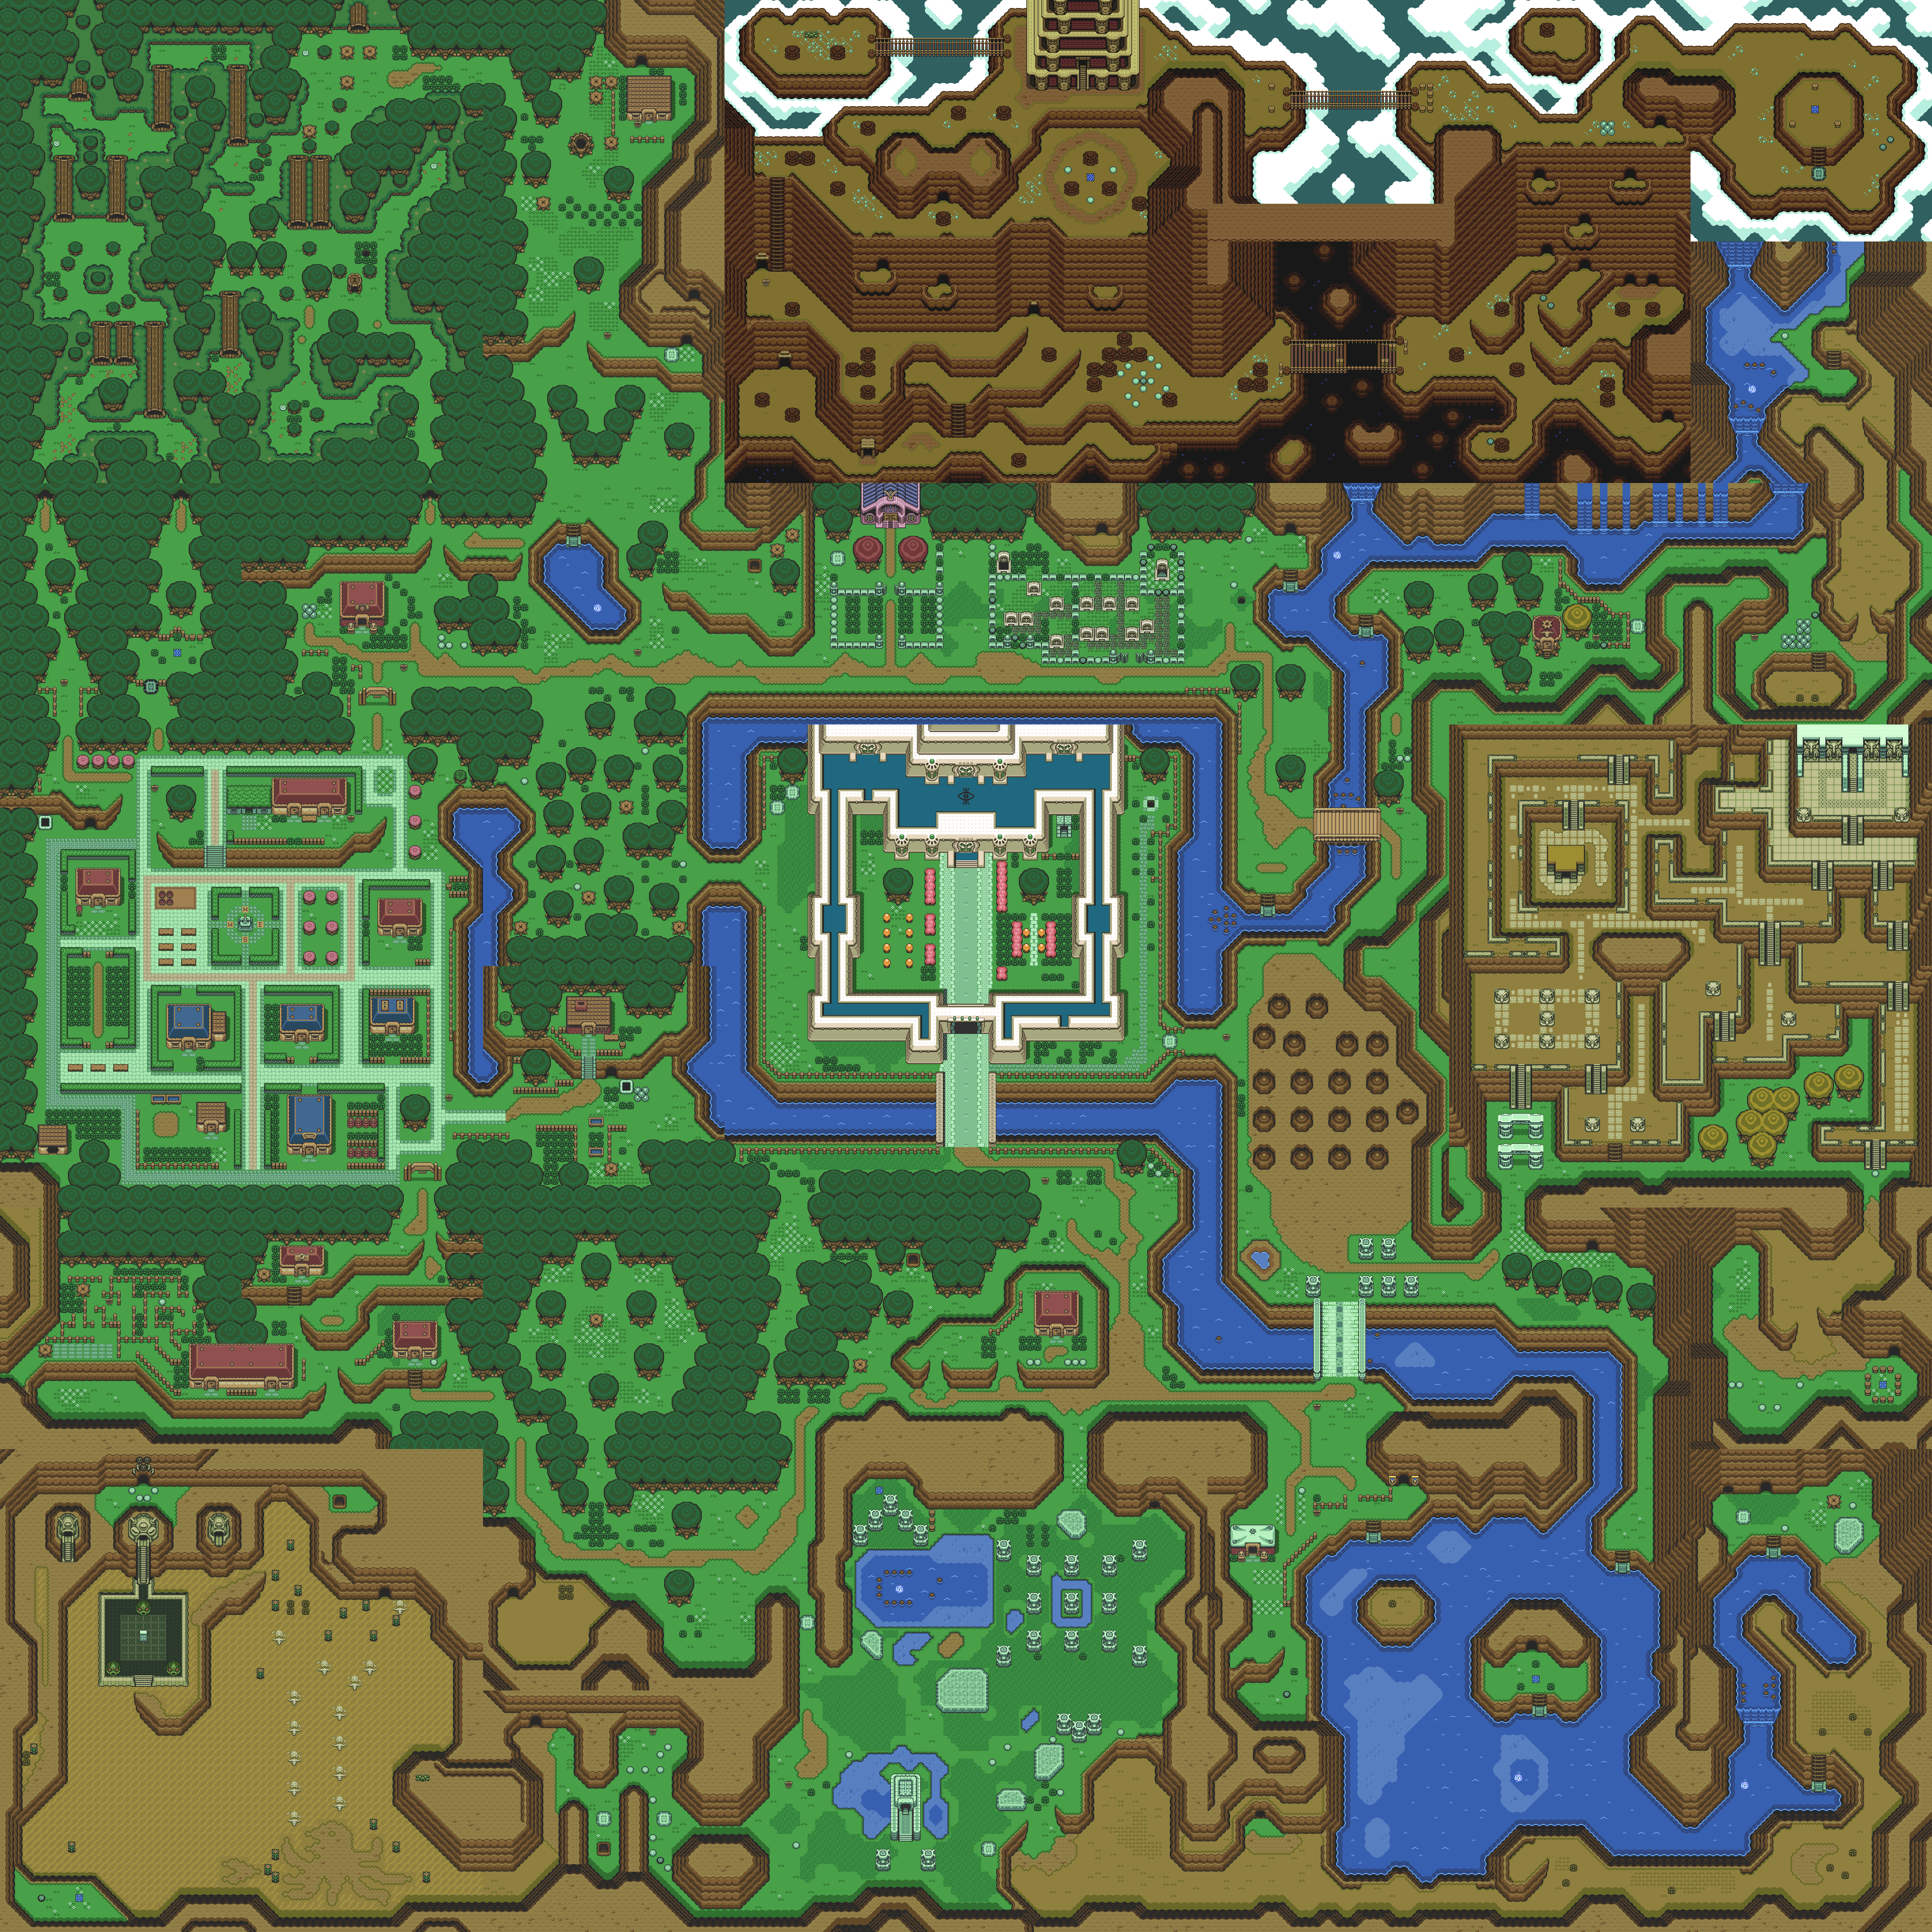 The Legend of Zelda: A Link to the Past - All Warp Tiles 